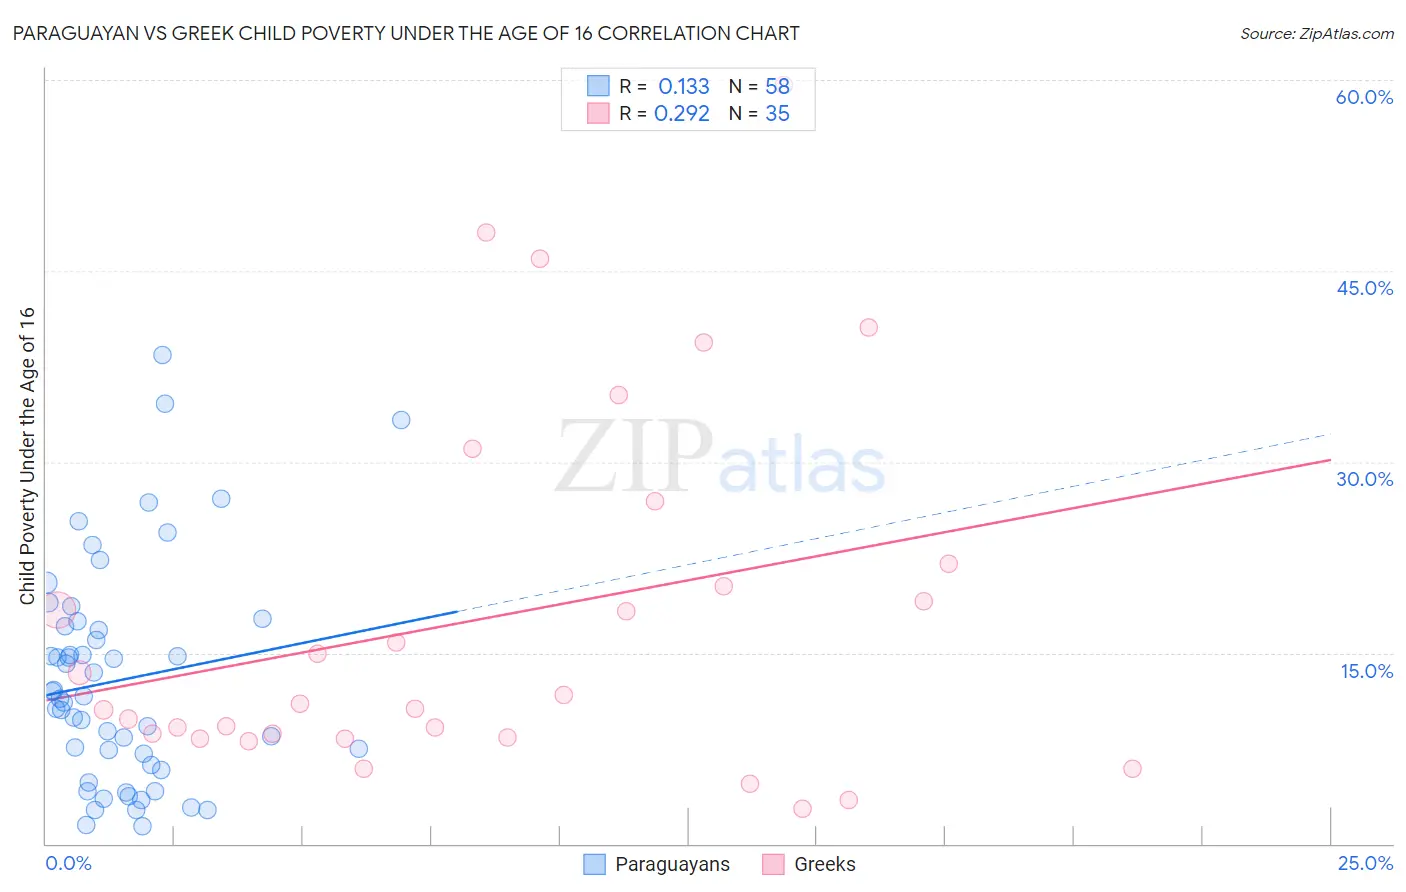 Paraguayan vs Greek Child Poverty Under the Age of 16